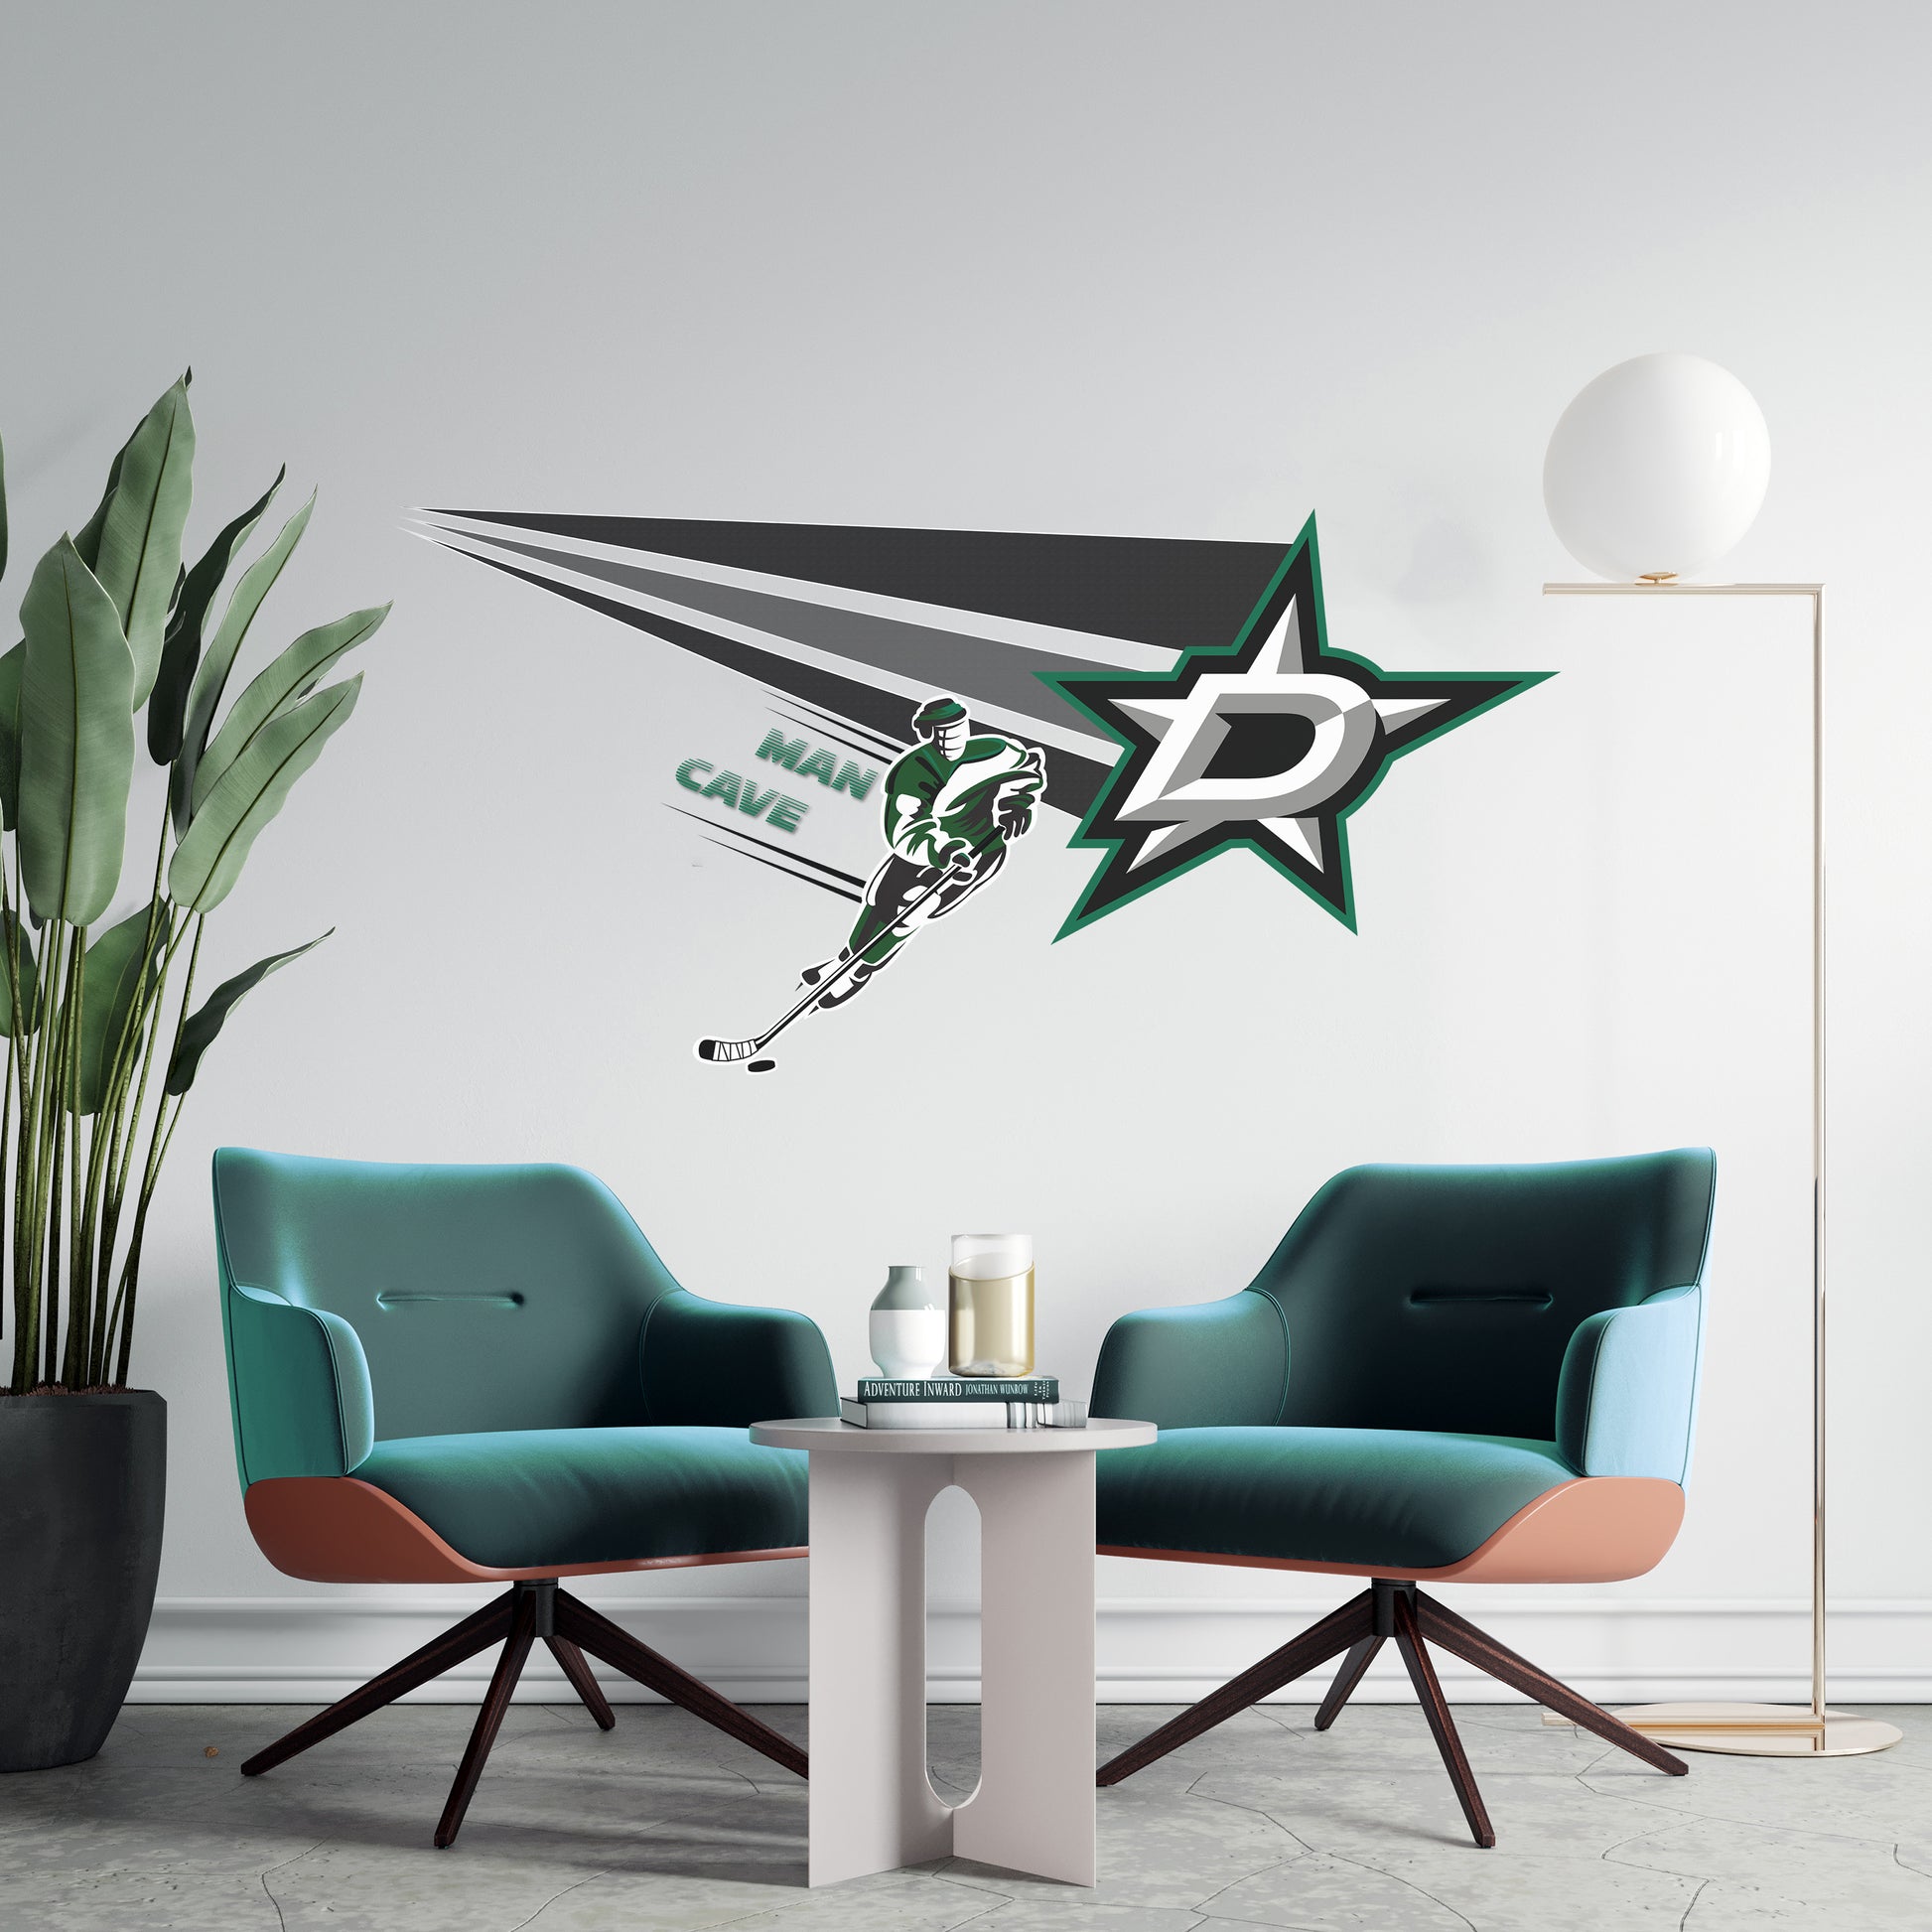 man cave wall decals